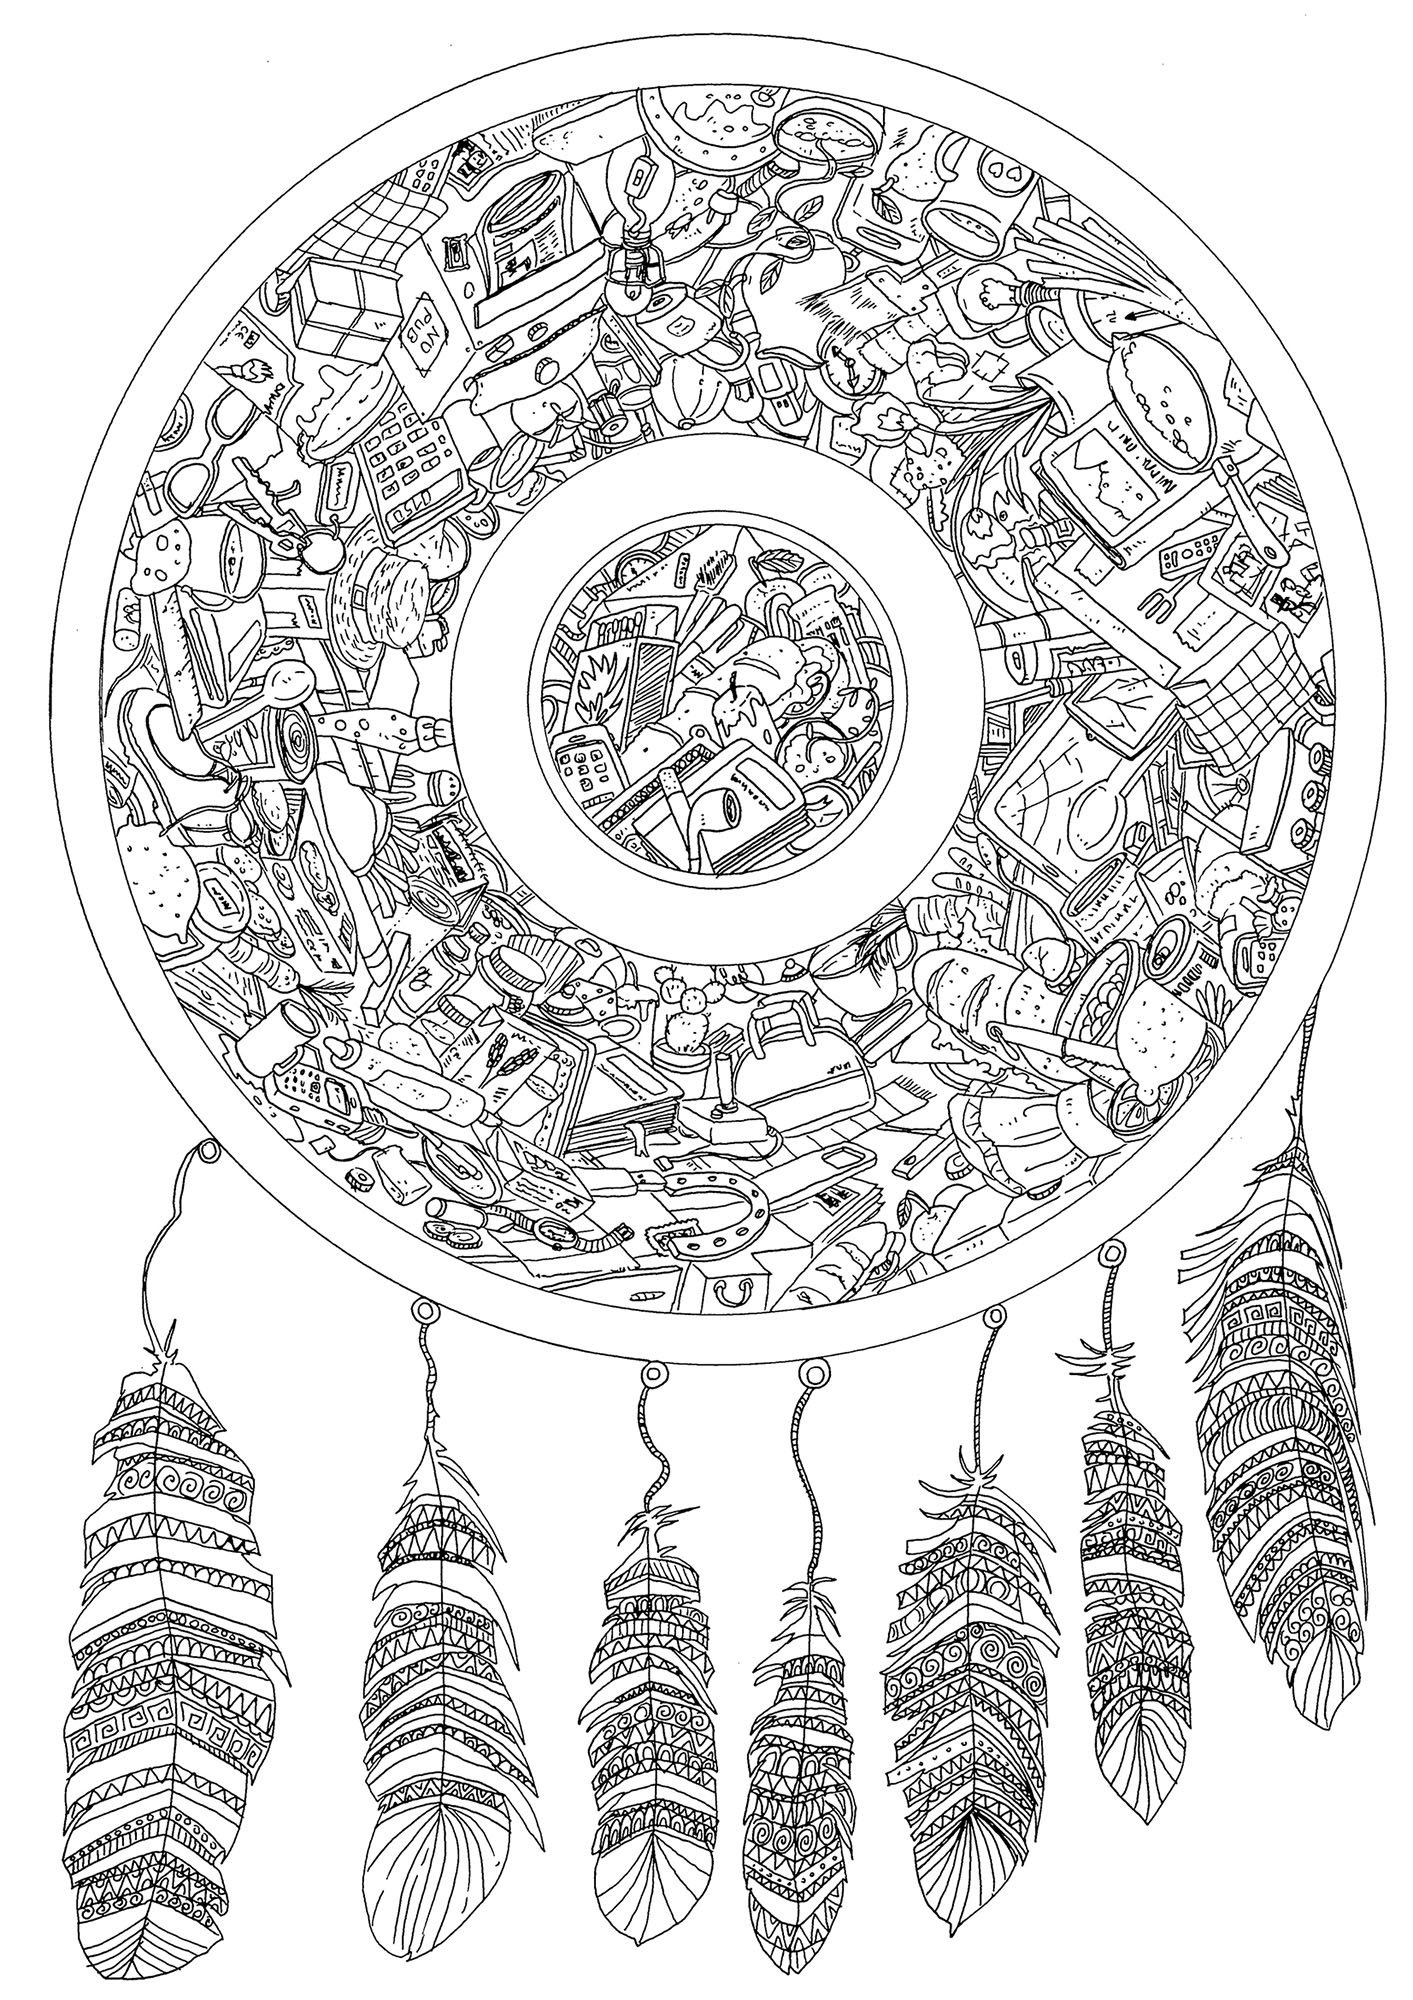 Dream catcher and hidden objects. Color this dream catcher, hiding lots of intricately drawn details.